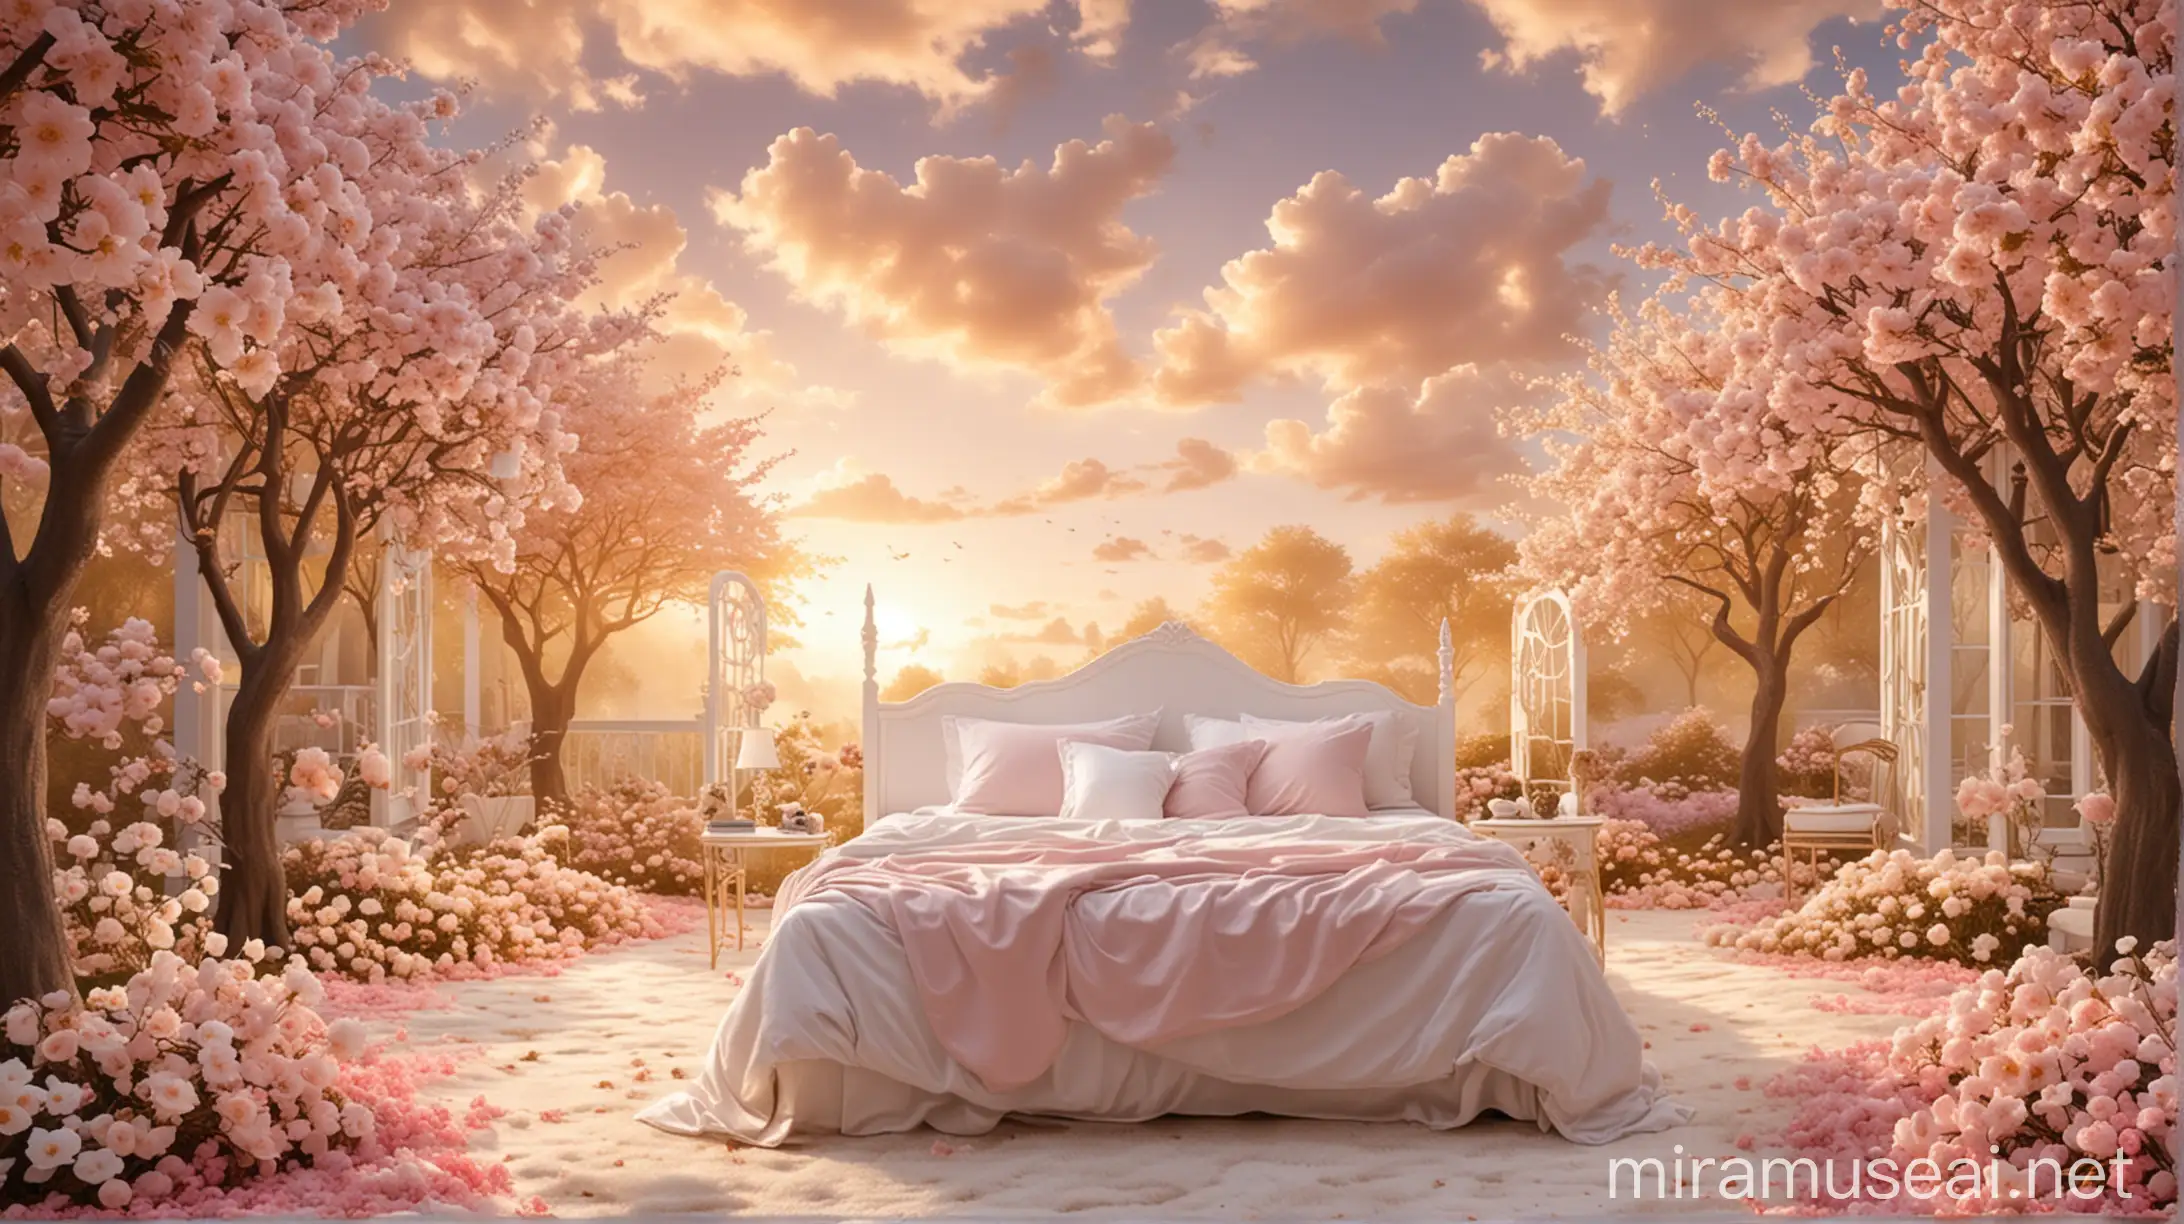 Dreamy Heaven Garden with White Bed and Golden Glow